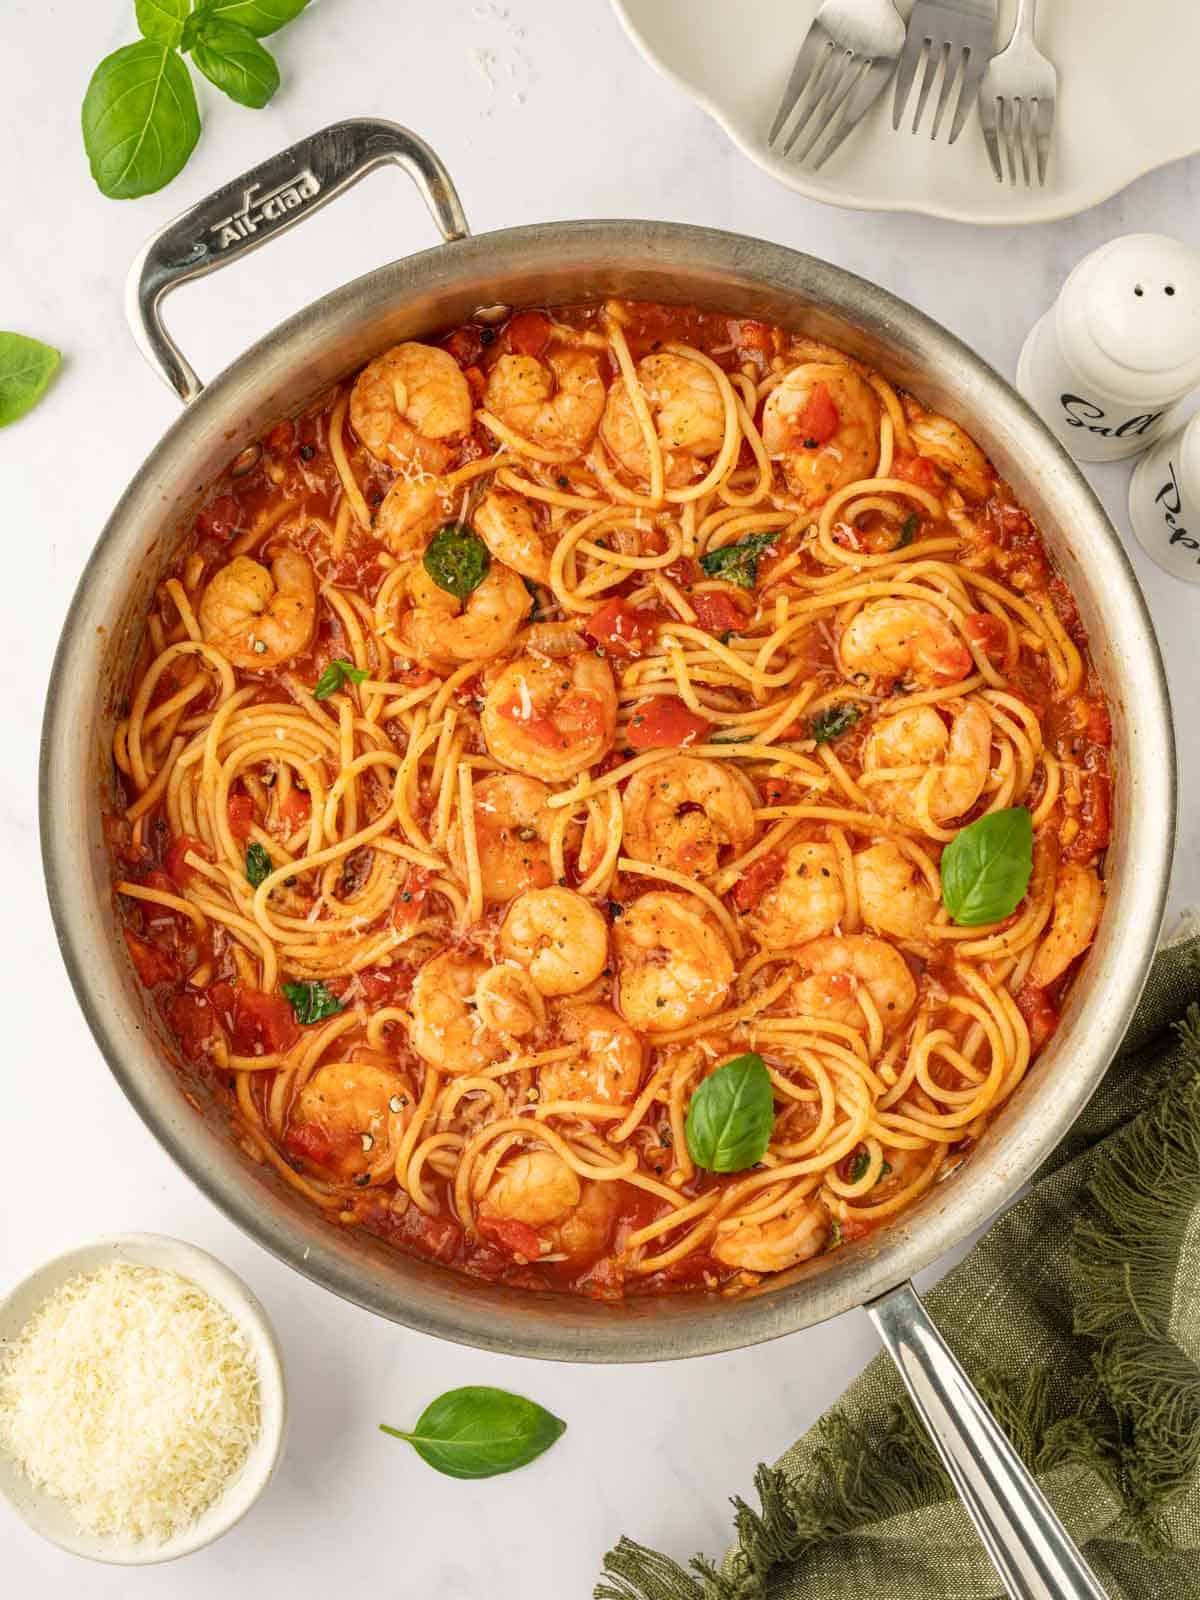 A skillet with spaghetti and shrimp in red sauce.